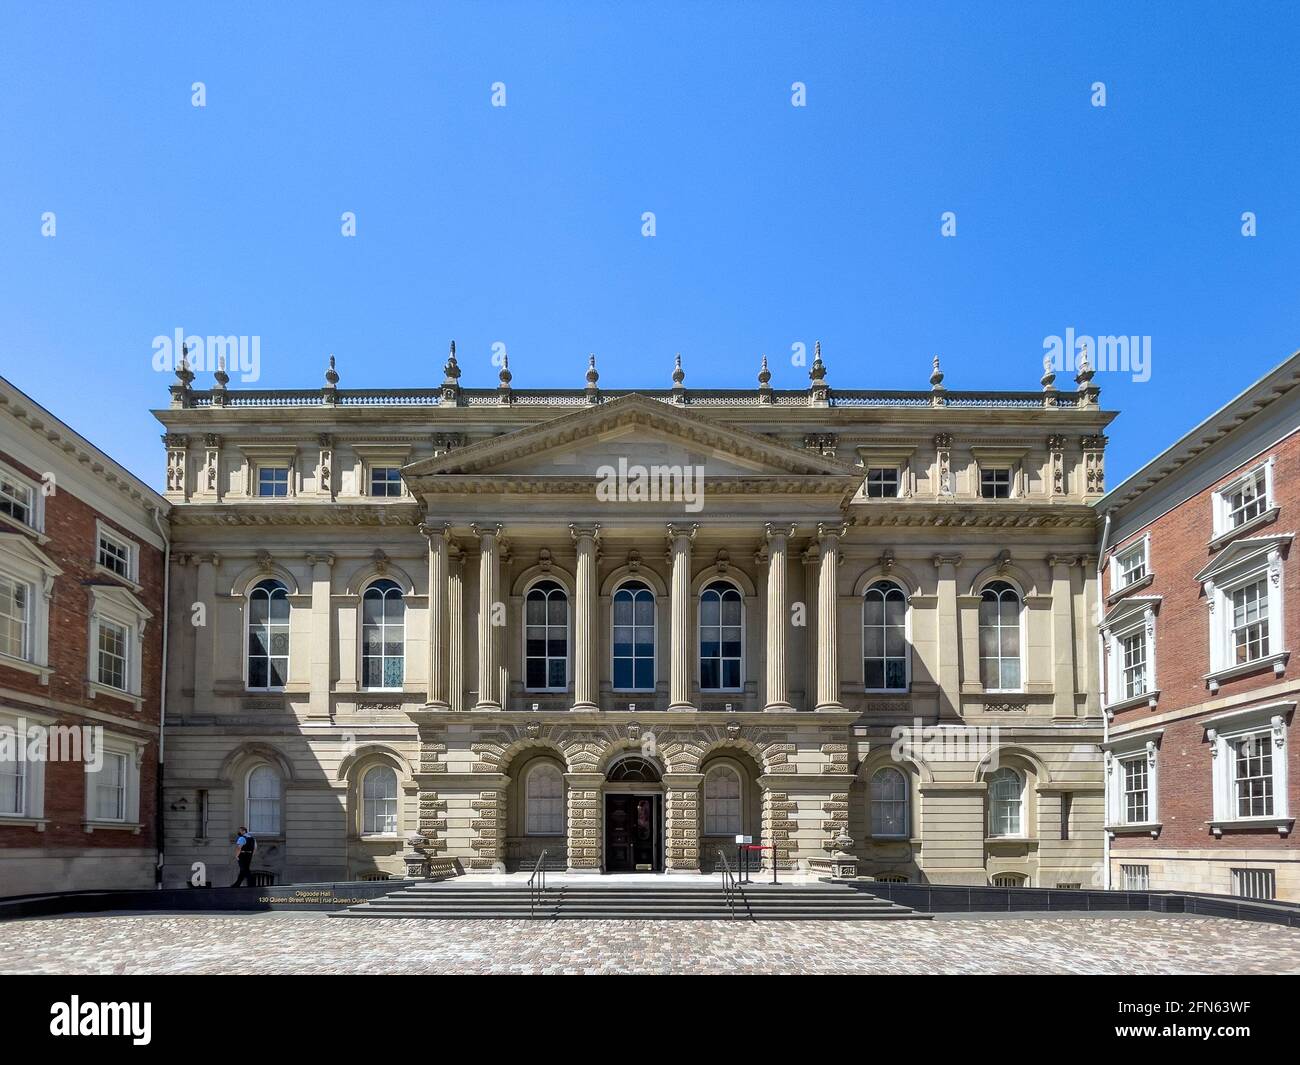 Osgoode Hall with a  late Palladian architectural style. The landmark is placed in the downtown district by the Nathan Phillips square in Toronto, Can Stock Photo